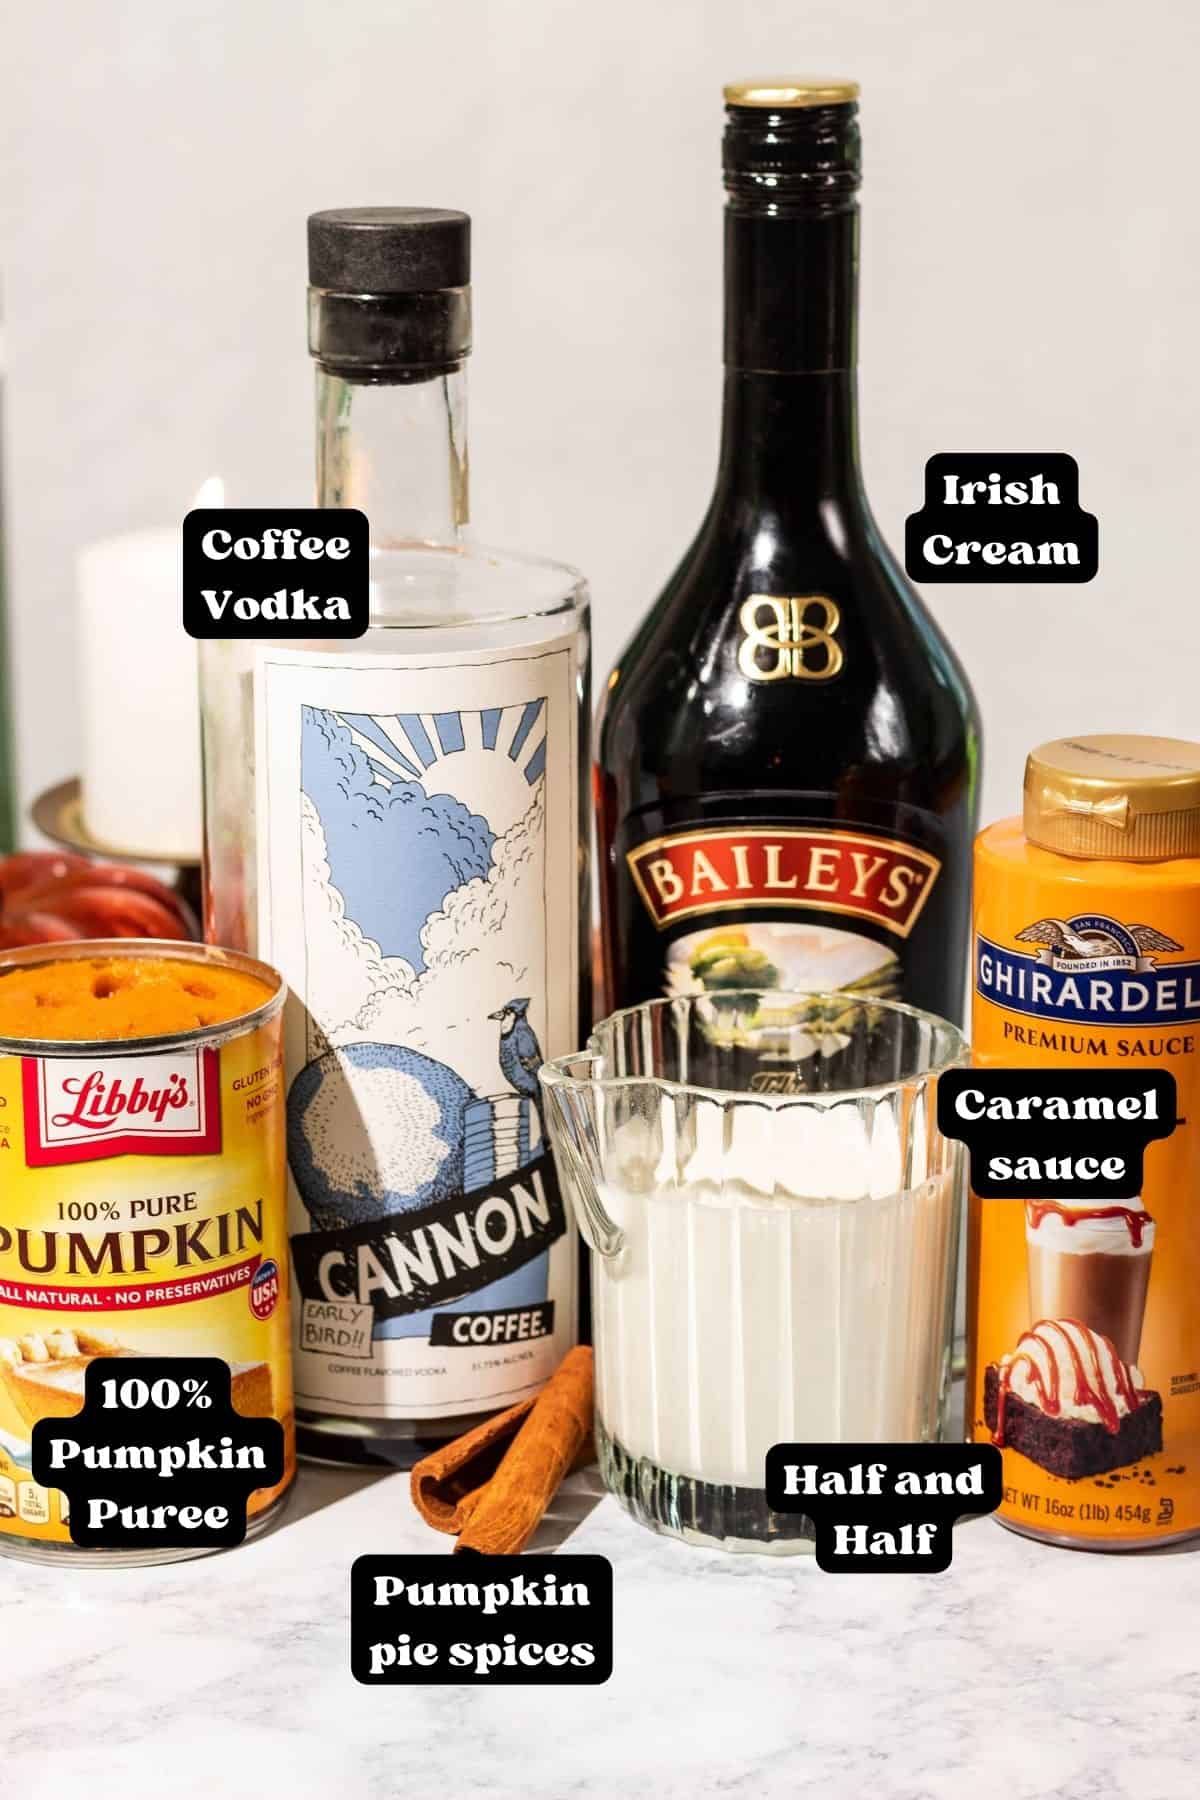 Ingredients labeled in black and white for a pumpkin mudslide including pumpkin puree in a can, a cinnamon stick, coffee vodka, Baileys Irish cream, half and half in a cream pitcher, and a bottle of caramel sauce.